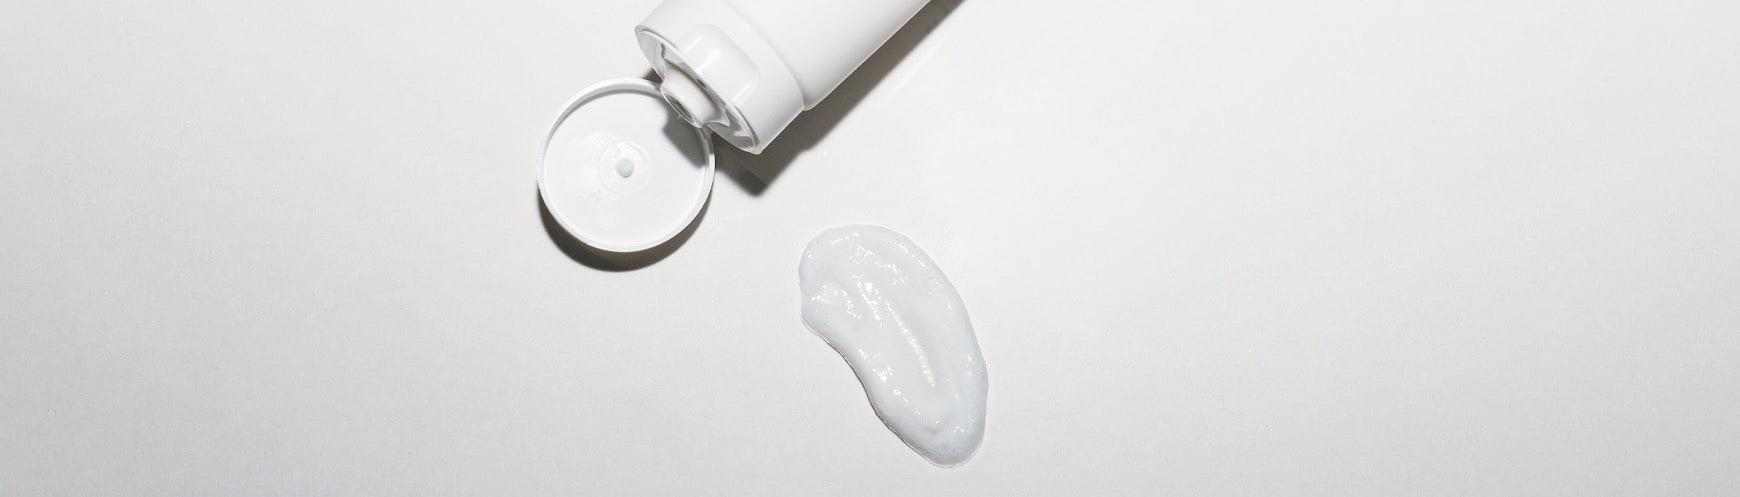 open cap of the hydrating cleanser bottle and a smear of the cleanser cream